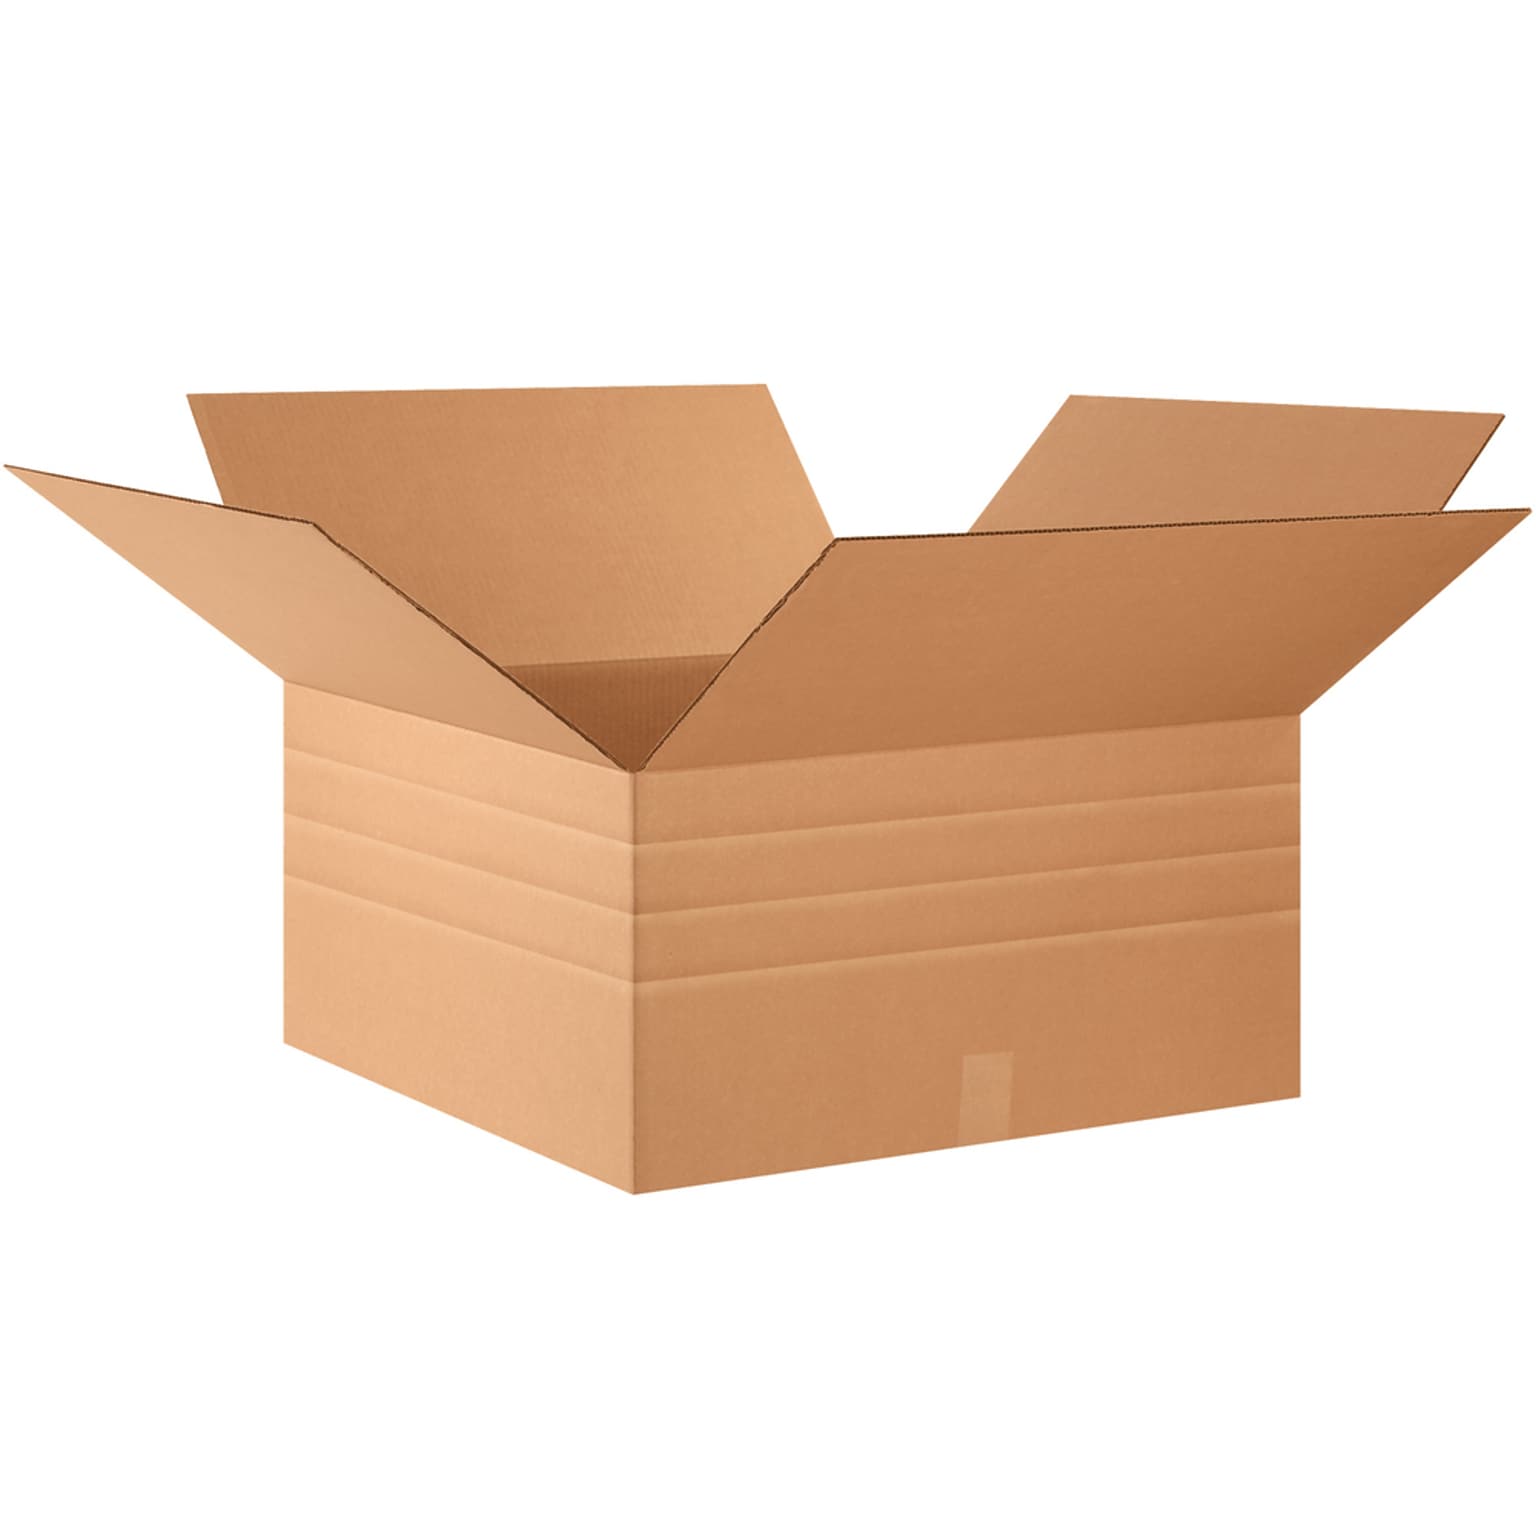 SI Products 24 x 24 x 12 Multi-Depth Shipping Boxes, 200#/ECT-32 Mullen Rated Corrugated, Pack of 10, (MD242412)